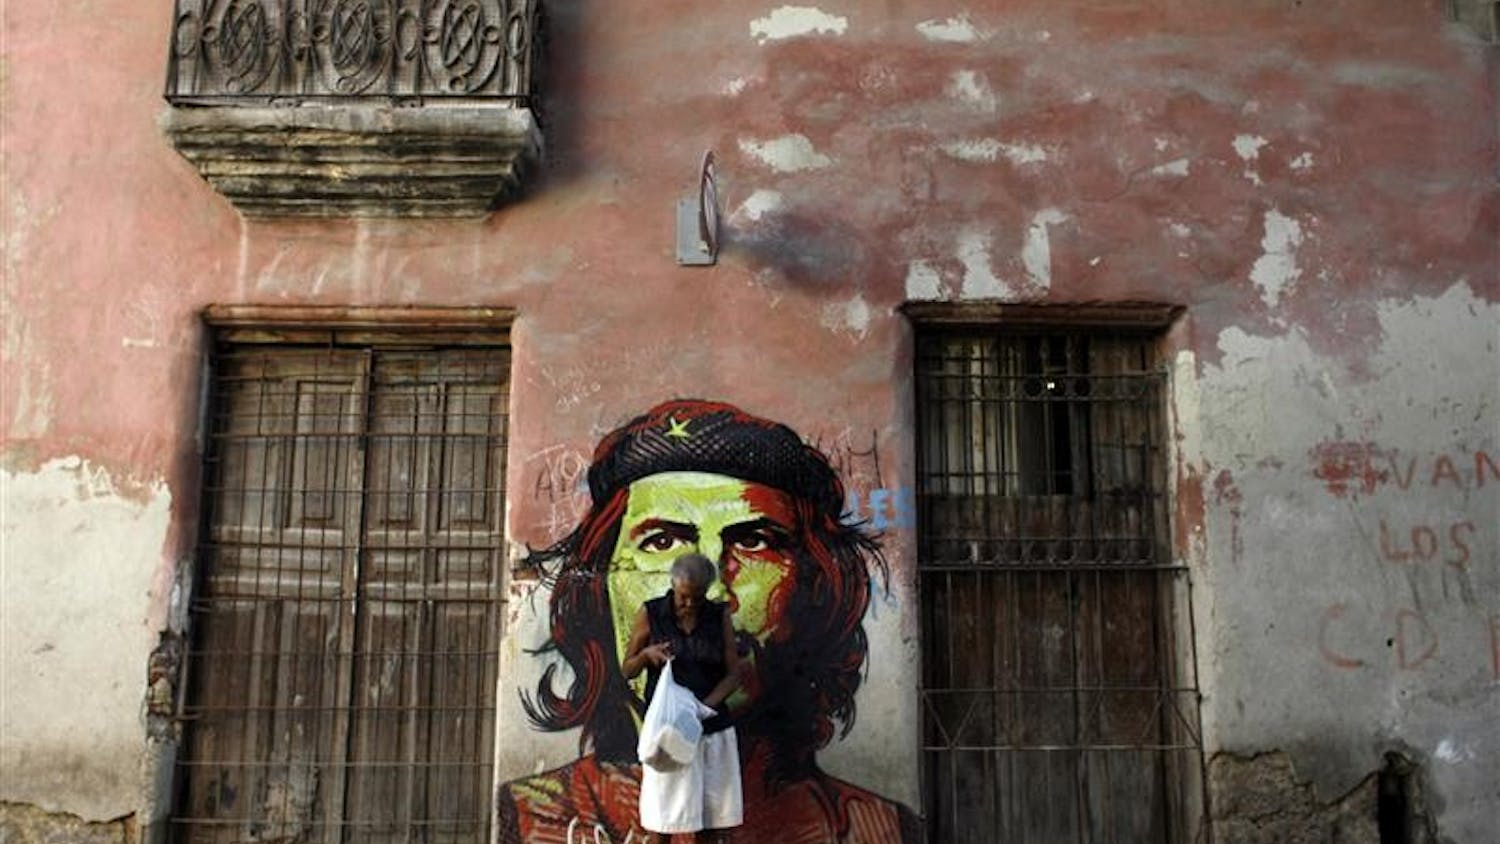 A woman walks past a graffiti depicting Argentine-born revolutionary hero Ernesto "Che" Guevara on Wednesday in Havana. Cuba marks the 41st anniversary of "Che" Guevara's death on Oct. 8, although he was killed on Oct. 9, 1967 in the town of La Higuera, Bolivia.